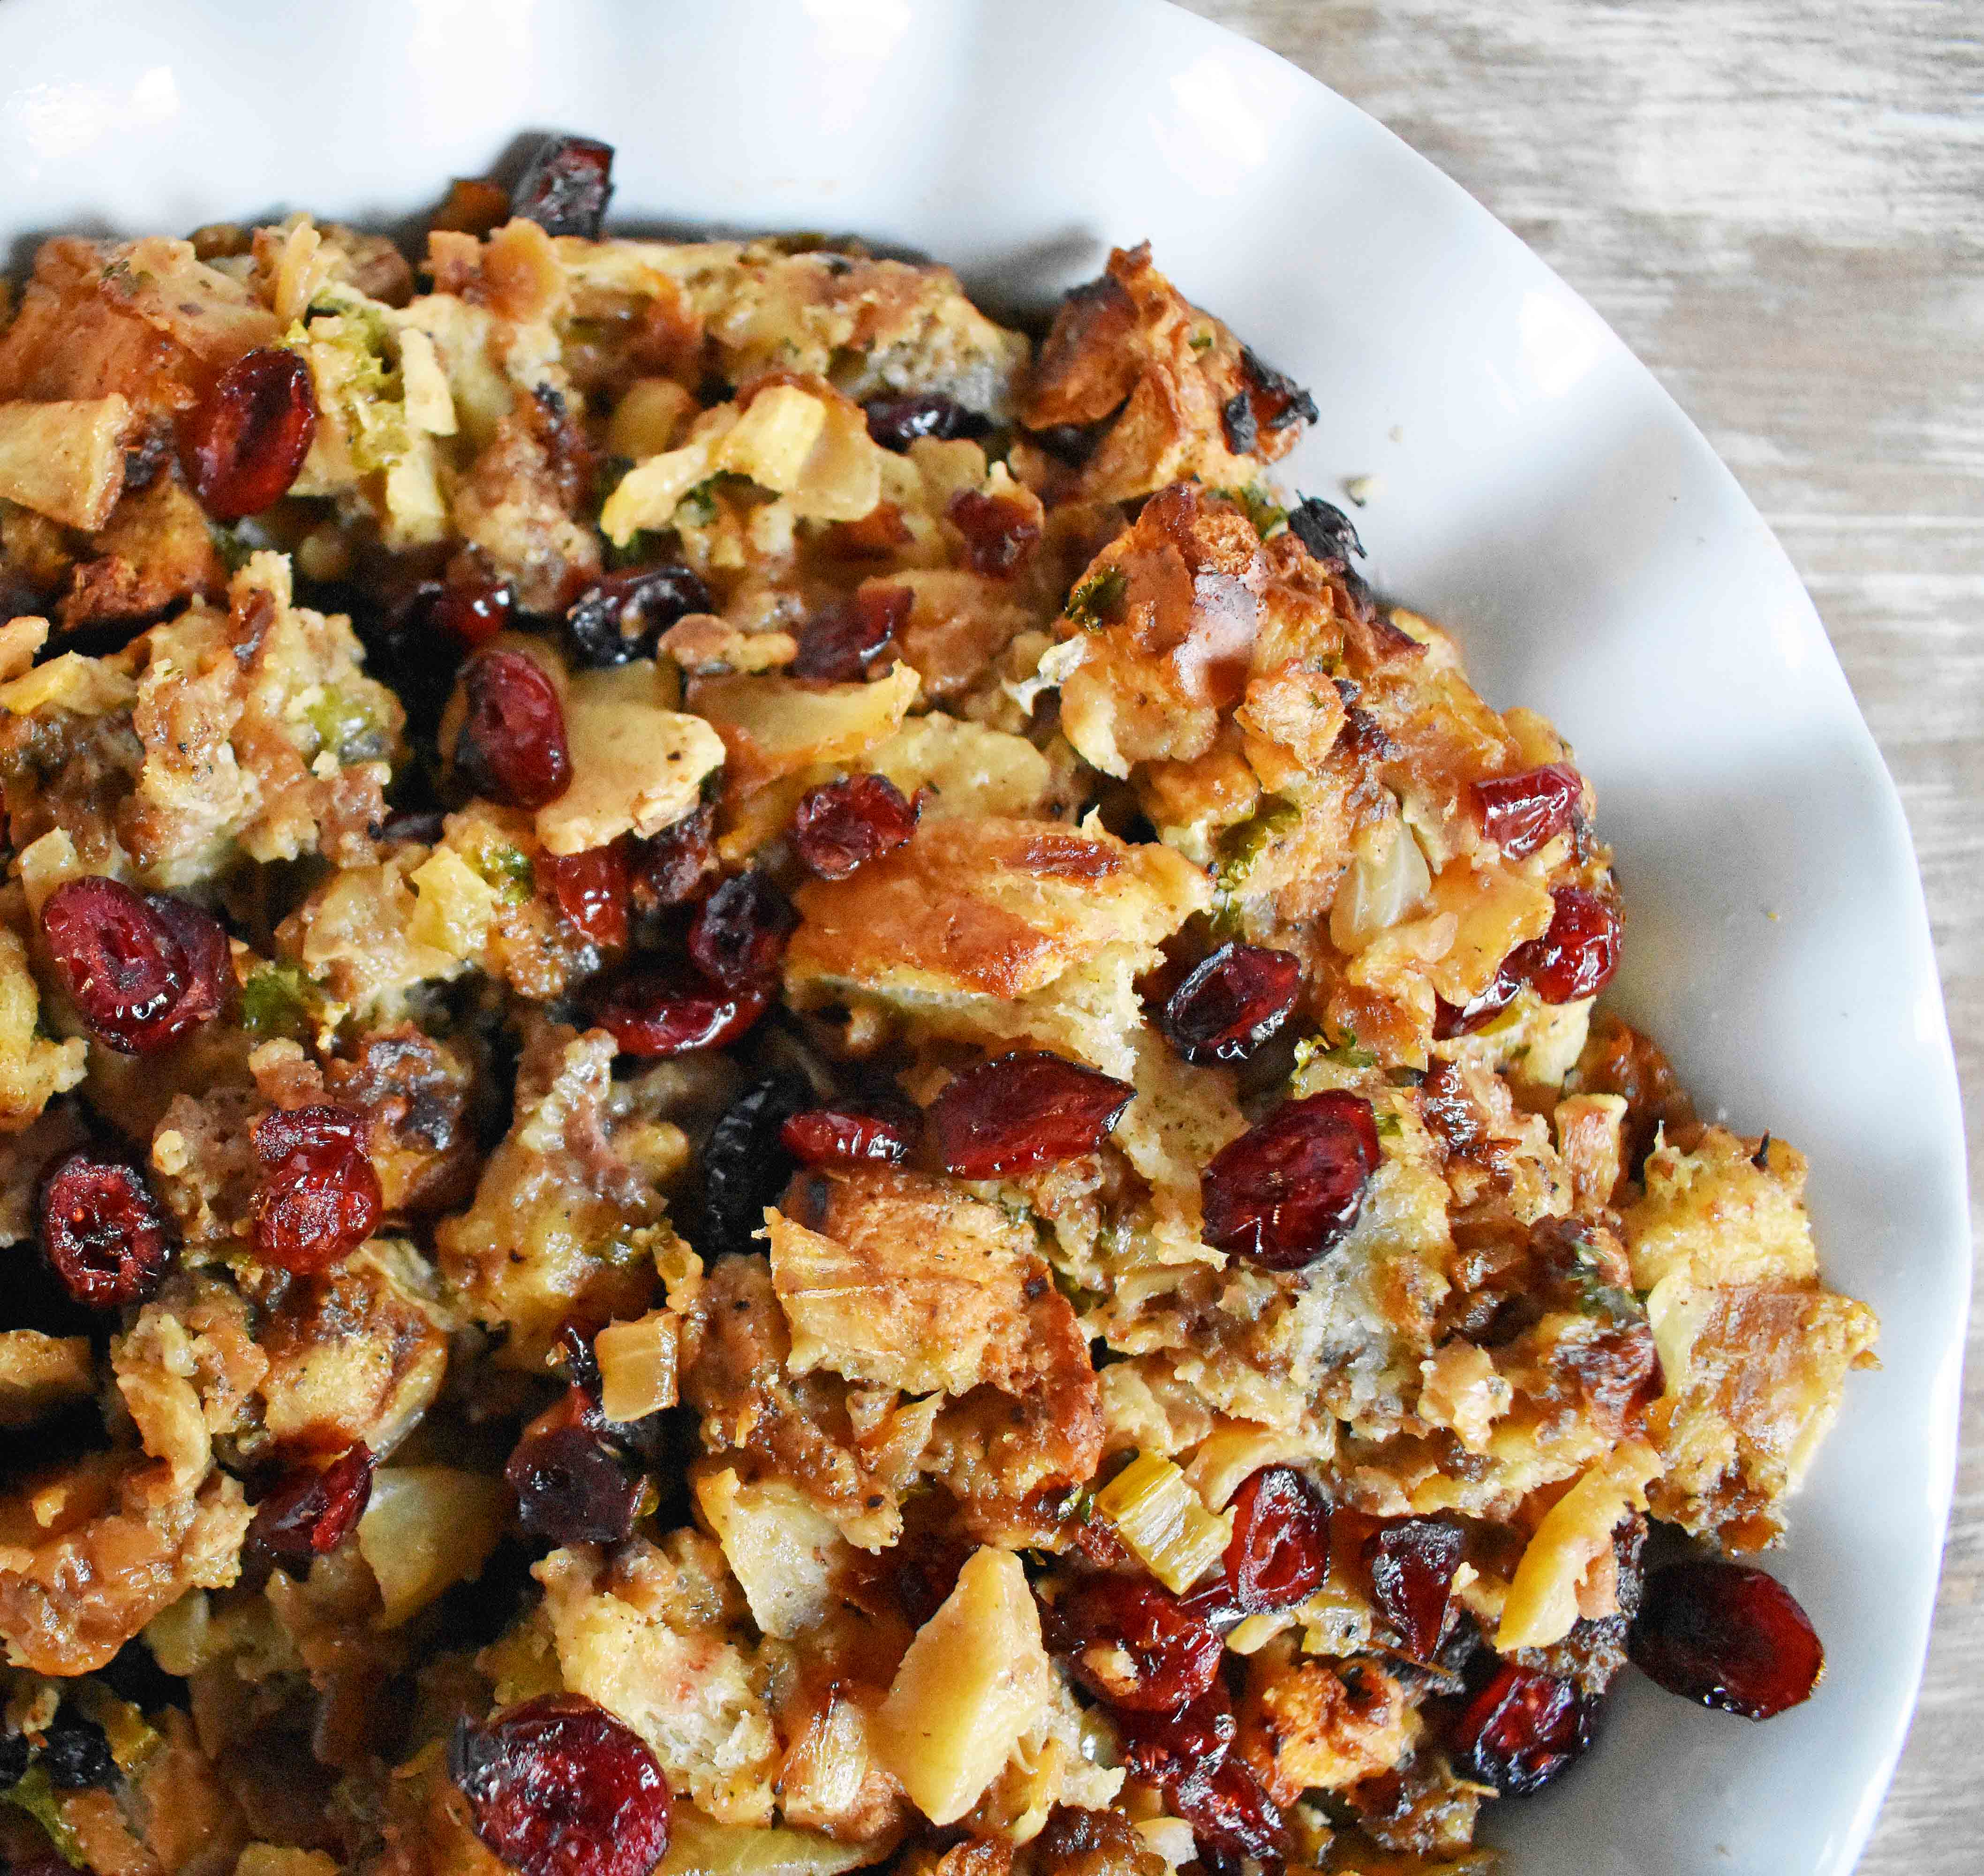 Cranberry Apple Sausage Stuffing by Modern Honey. Classic Bread Stuffing with Sausage, Dried Cranberries, and Crisp Apples. The perfect Thanksgiving side dish recipe!